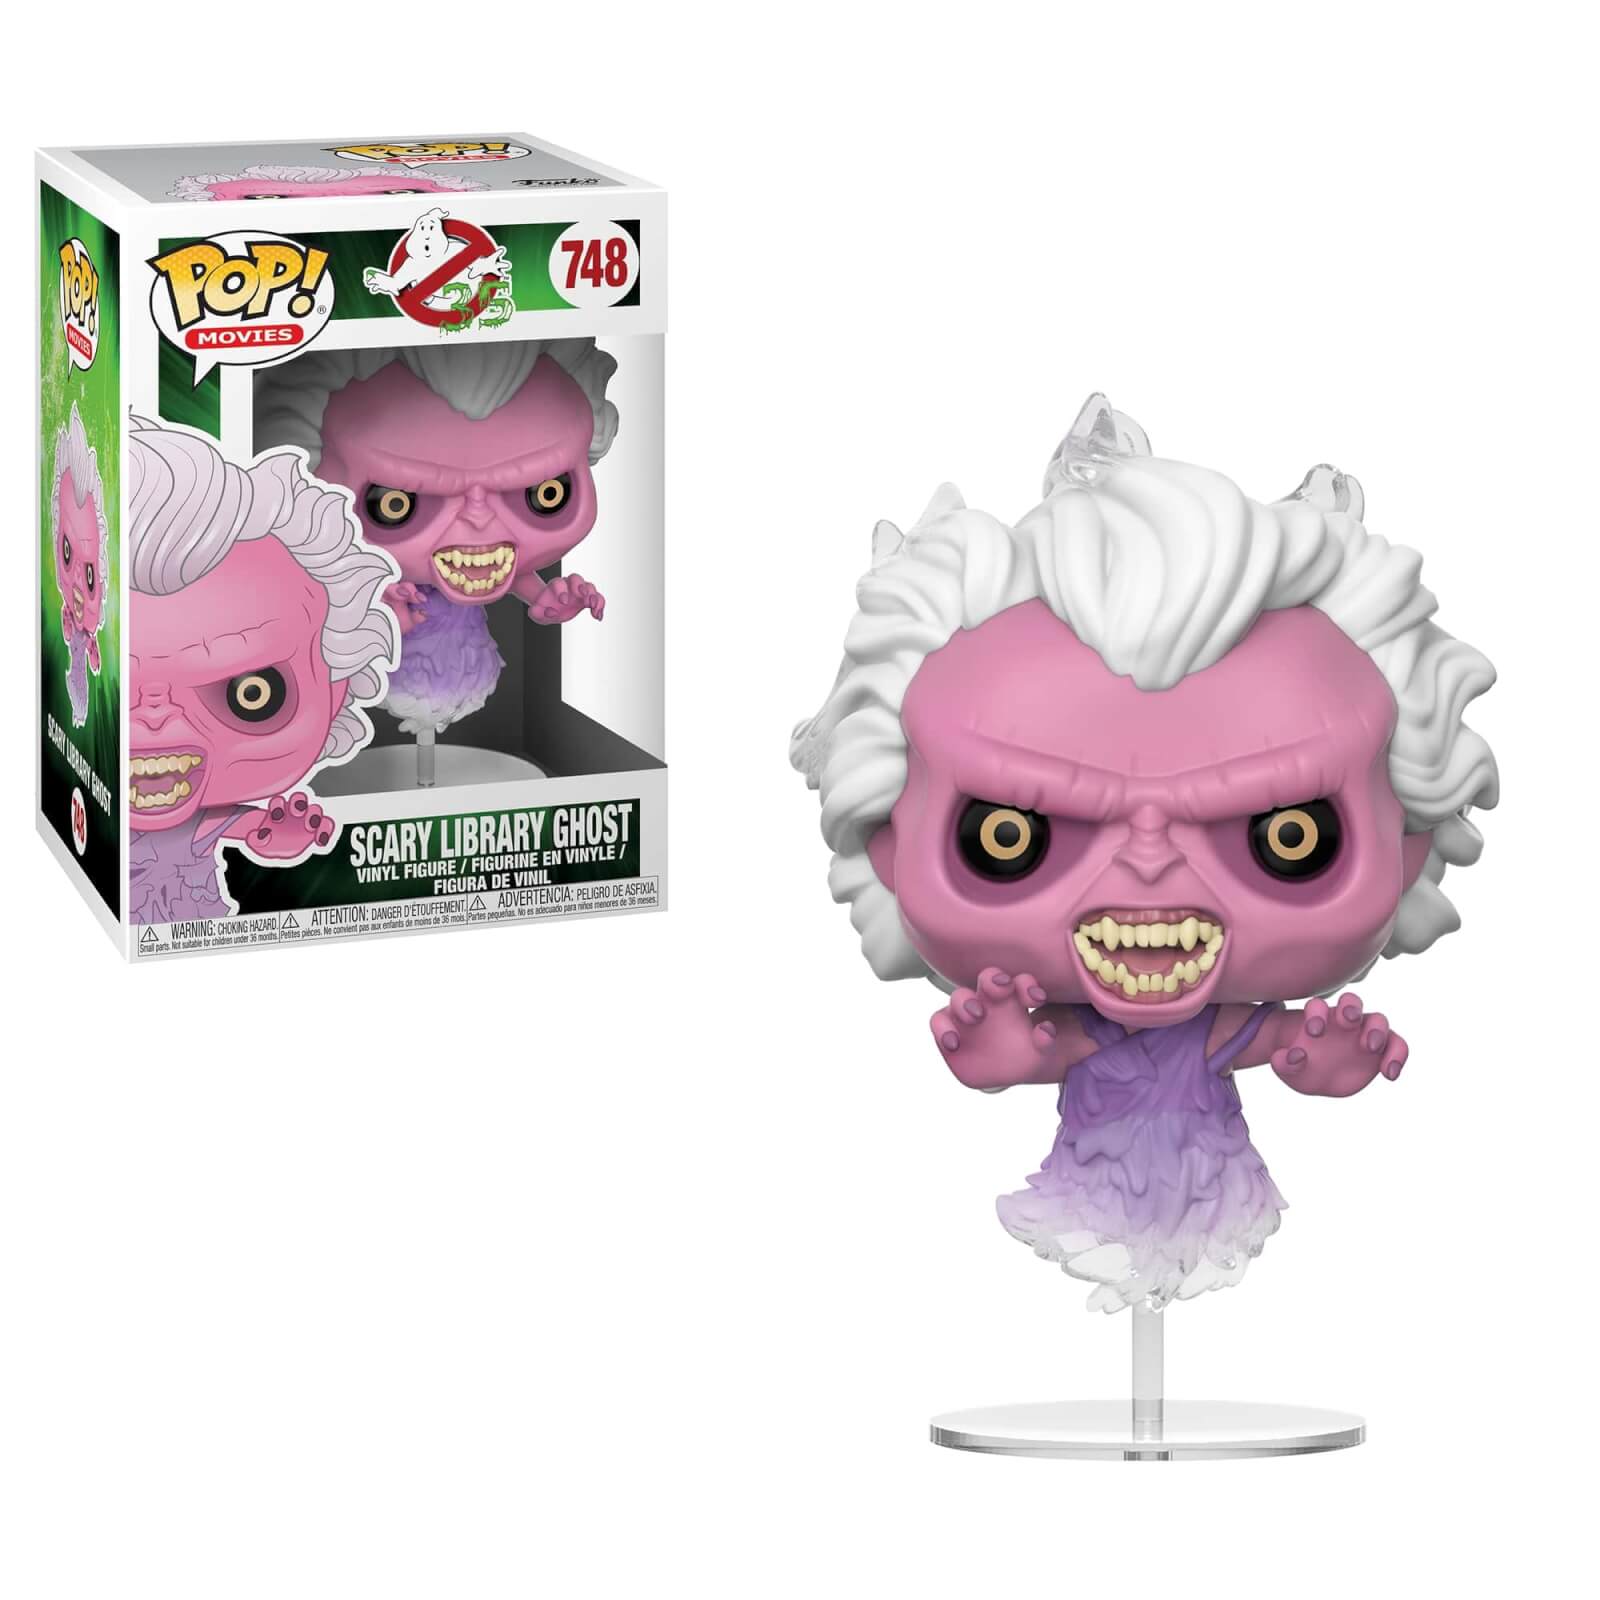 POP! Movies: Ghostbusters - Scary Library Ghost